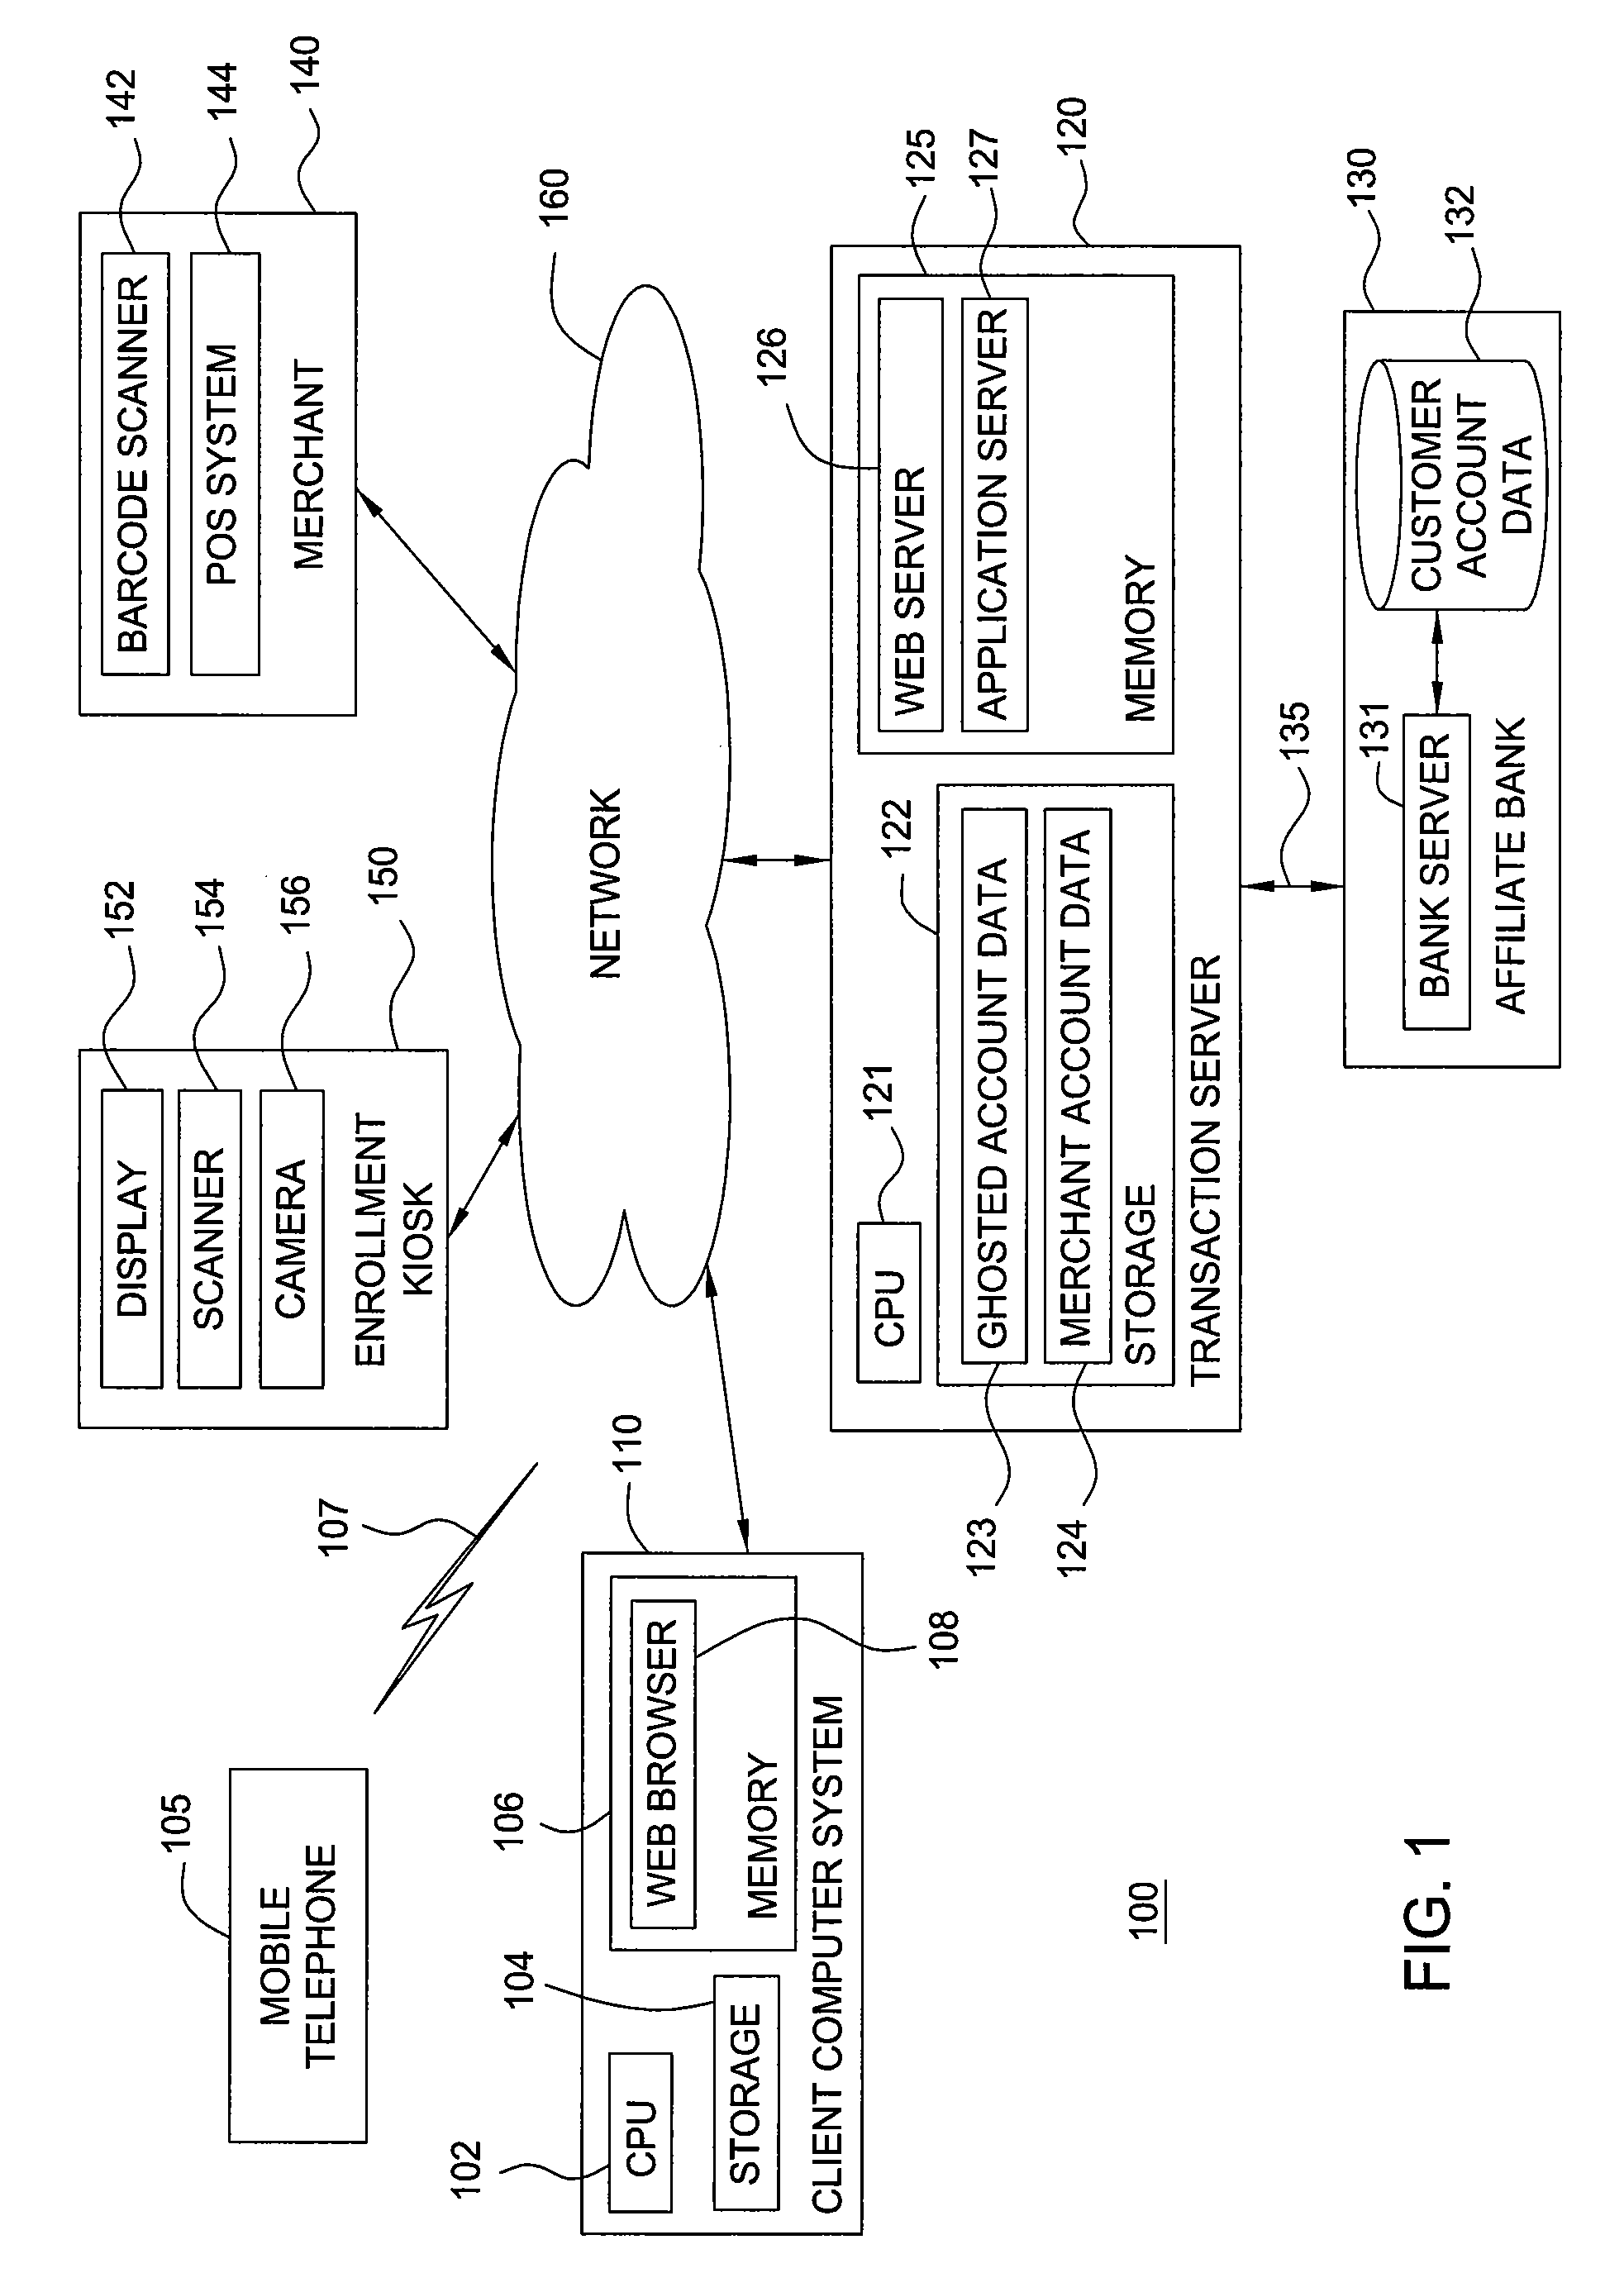 Transaction server configured to authorize payment transactions using mobile telephone devices